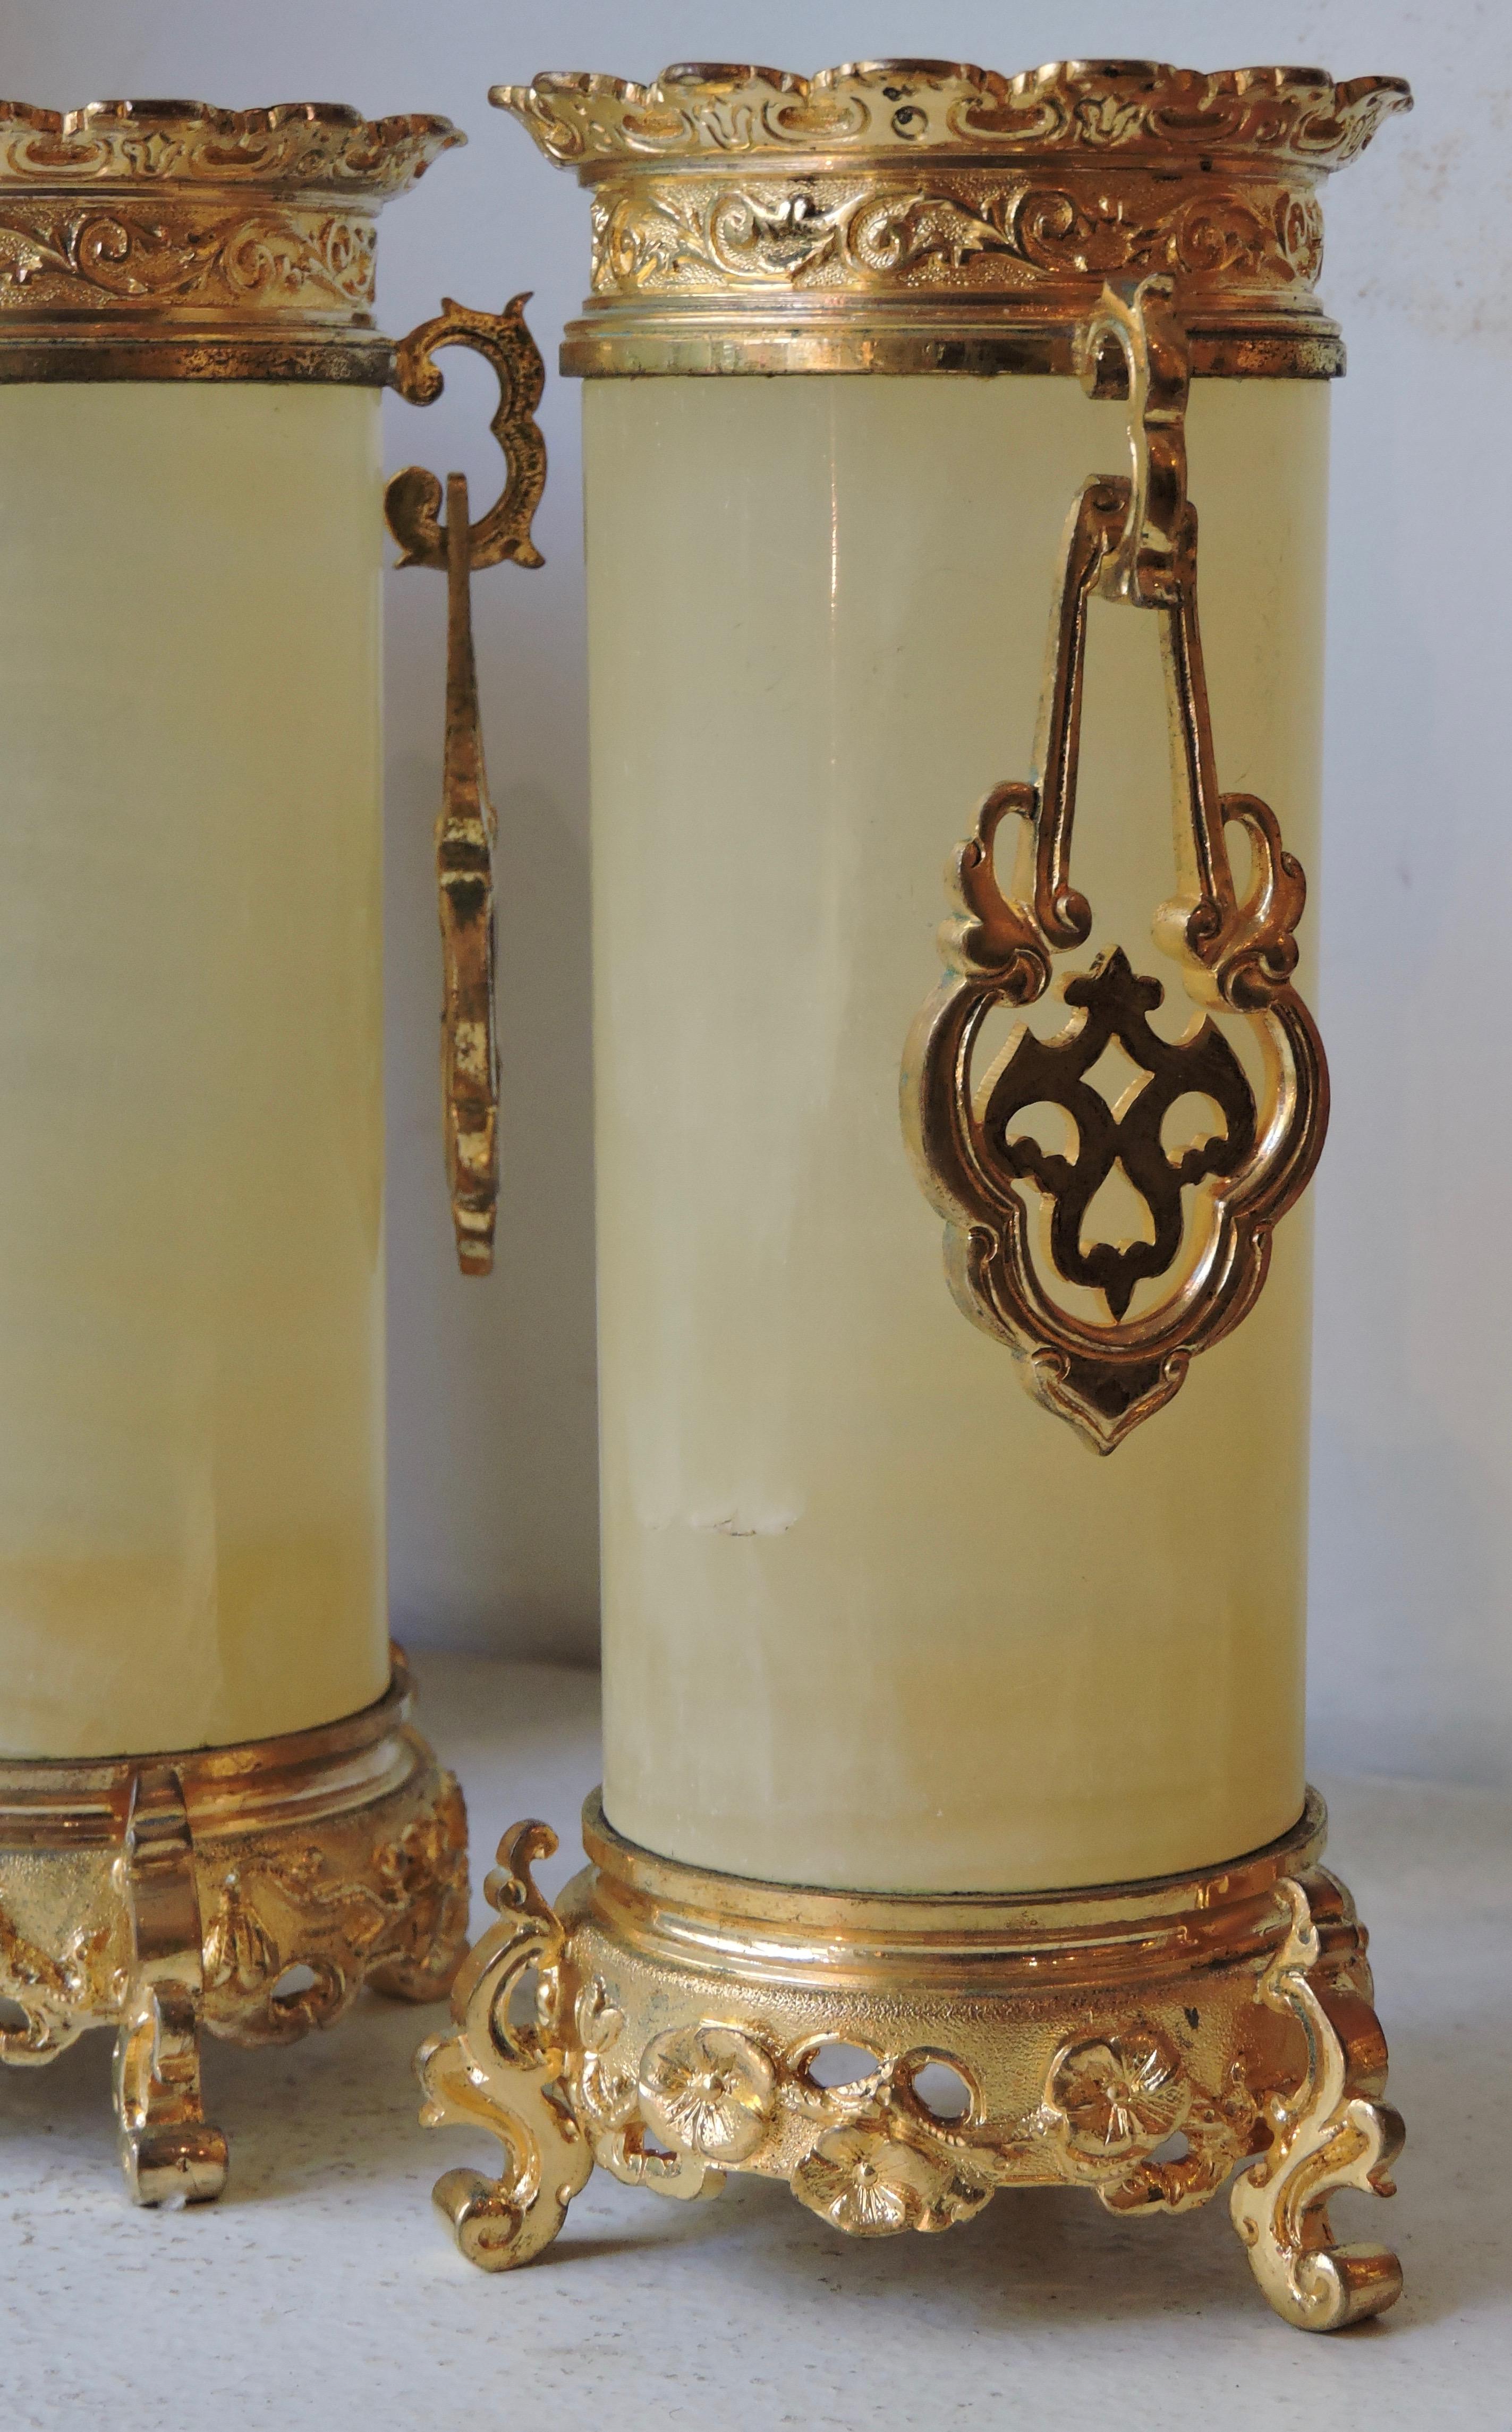 Set of 4 Japonisme Marble, Onyx and Ormolu Vases in the Style of Edouard Lièvre (Goldbronze)